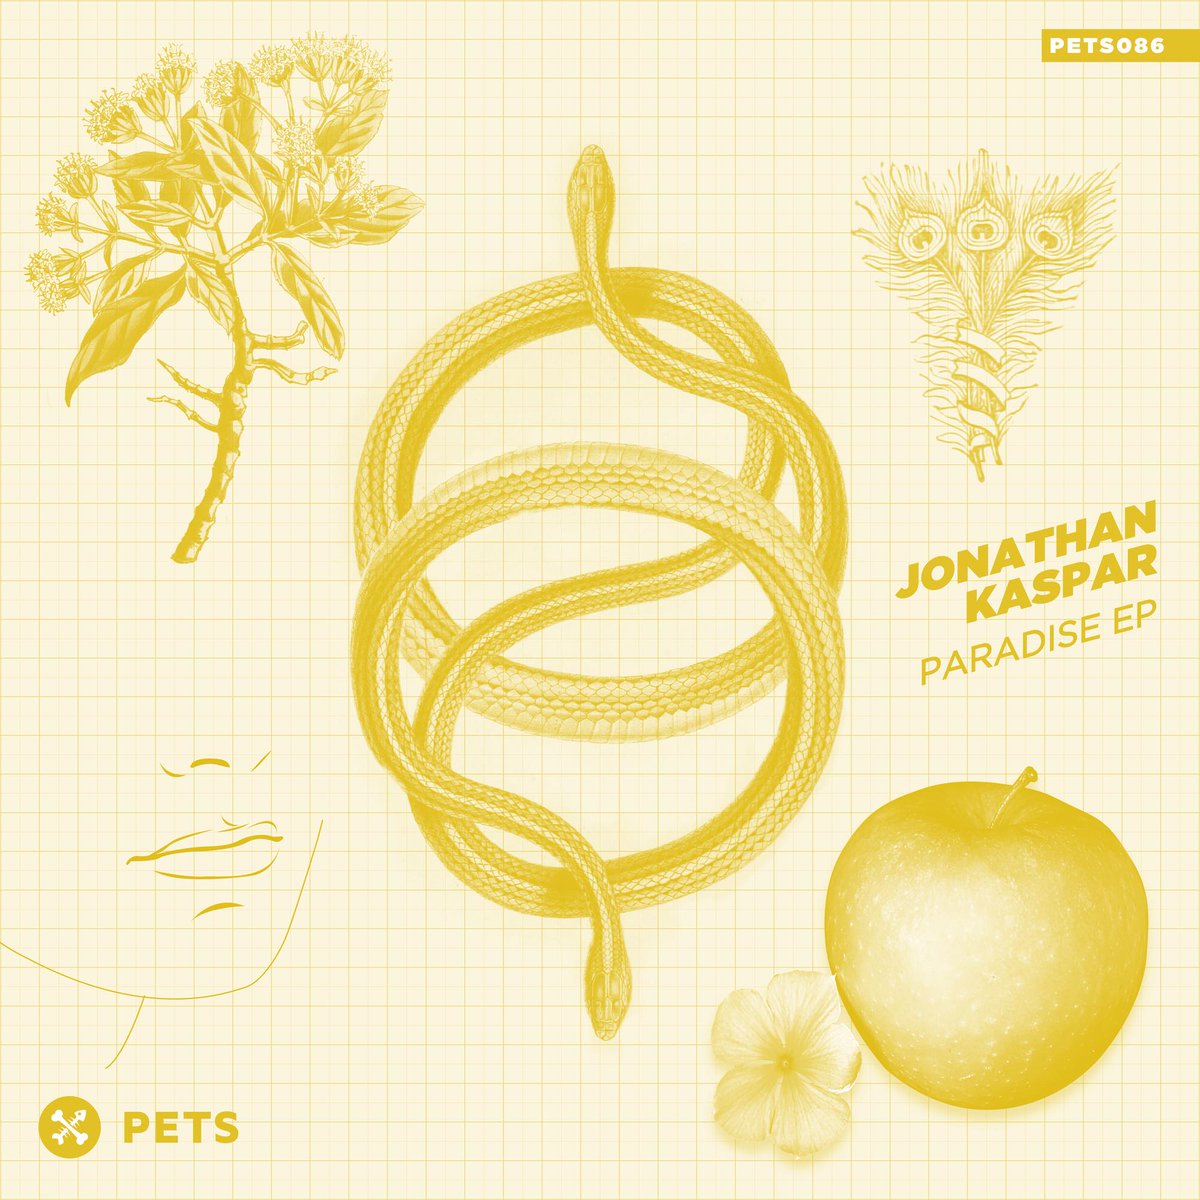 Riding high with his Objektivity single, @Jonathan_Kaspar readies his new release for @PetsRecordings . Wonky stuff! Promo is LIVE!!